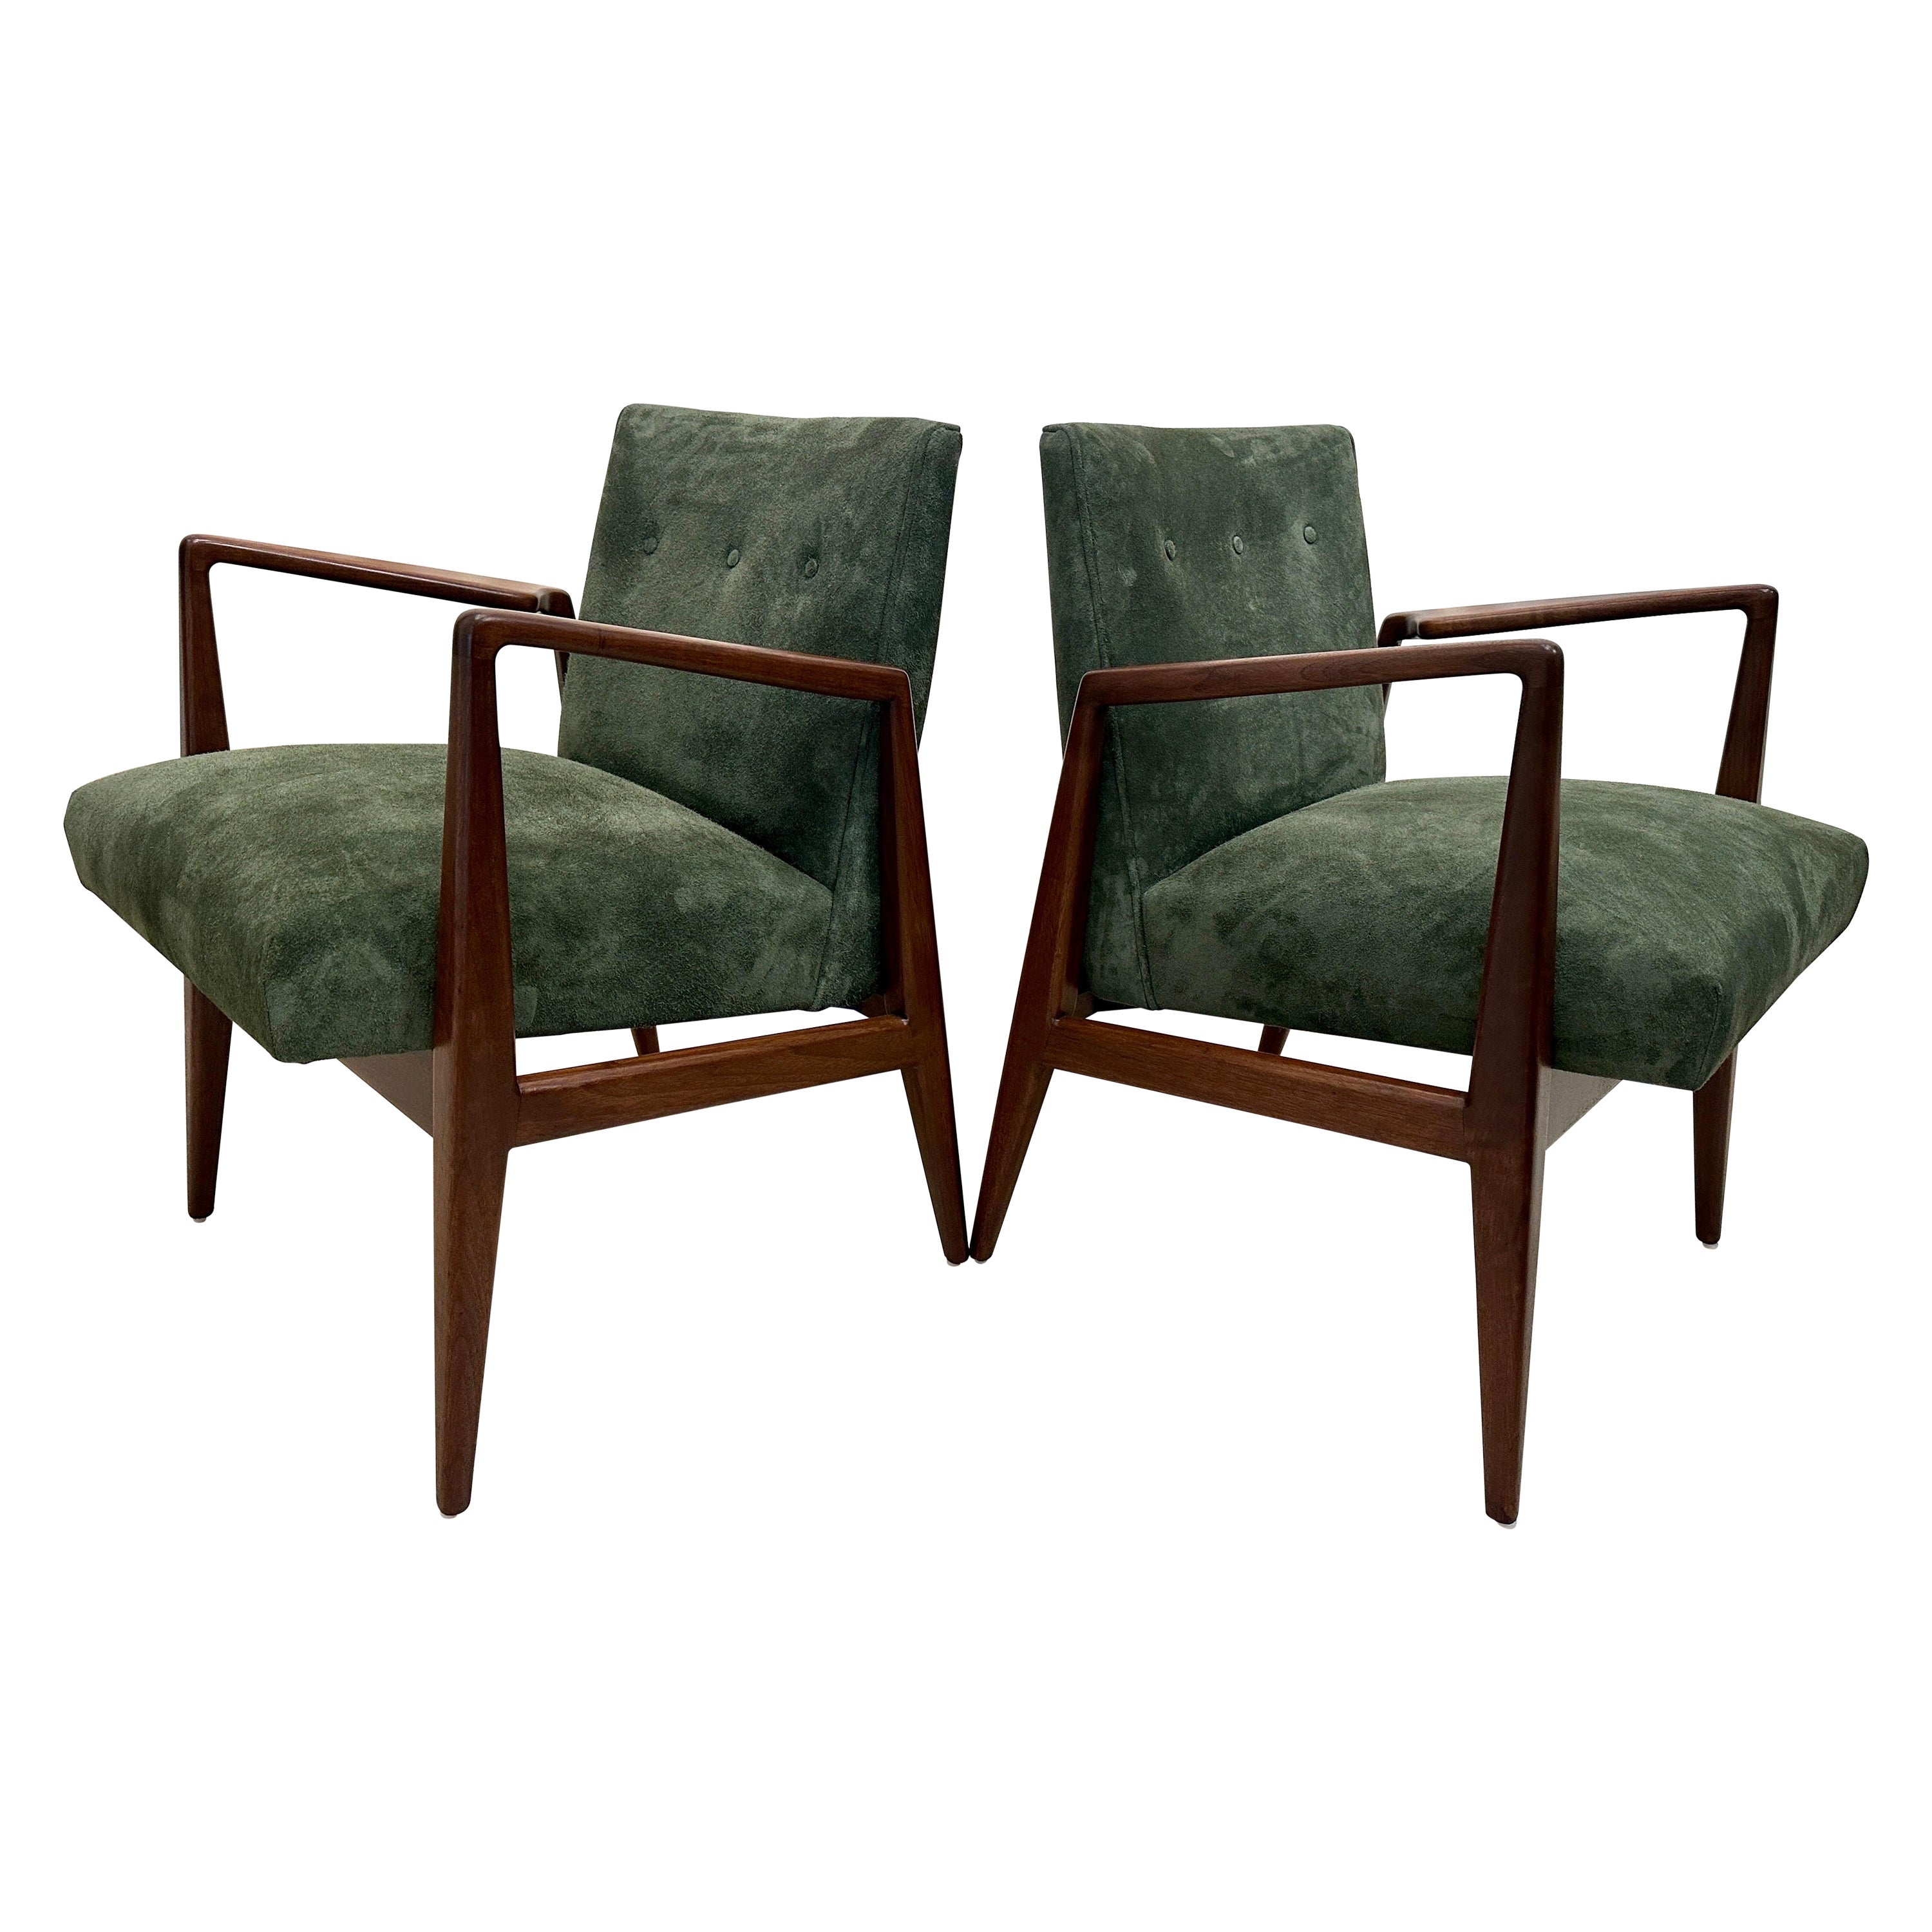 Original Vintage Jens Risom Armchairs in Green Suede w/ Label, PAIR For Sale